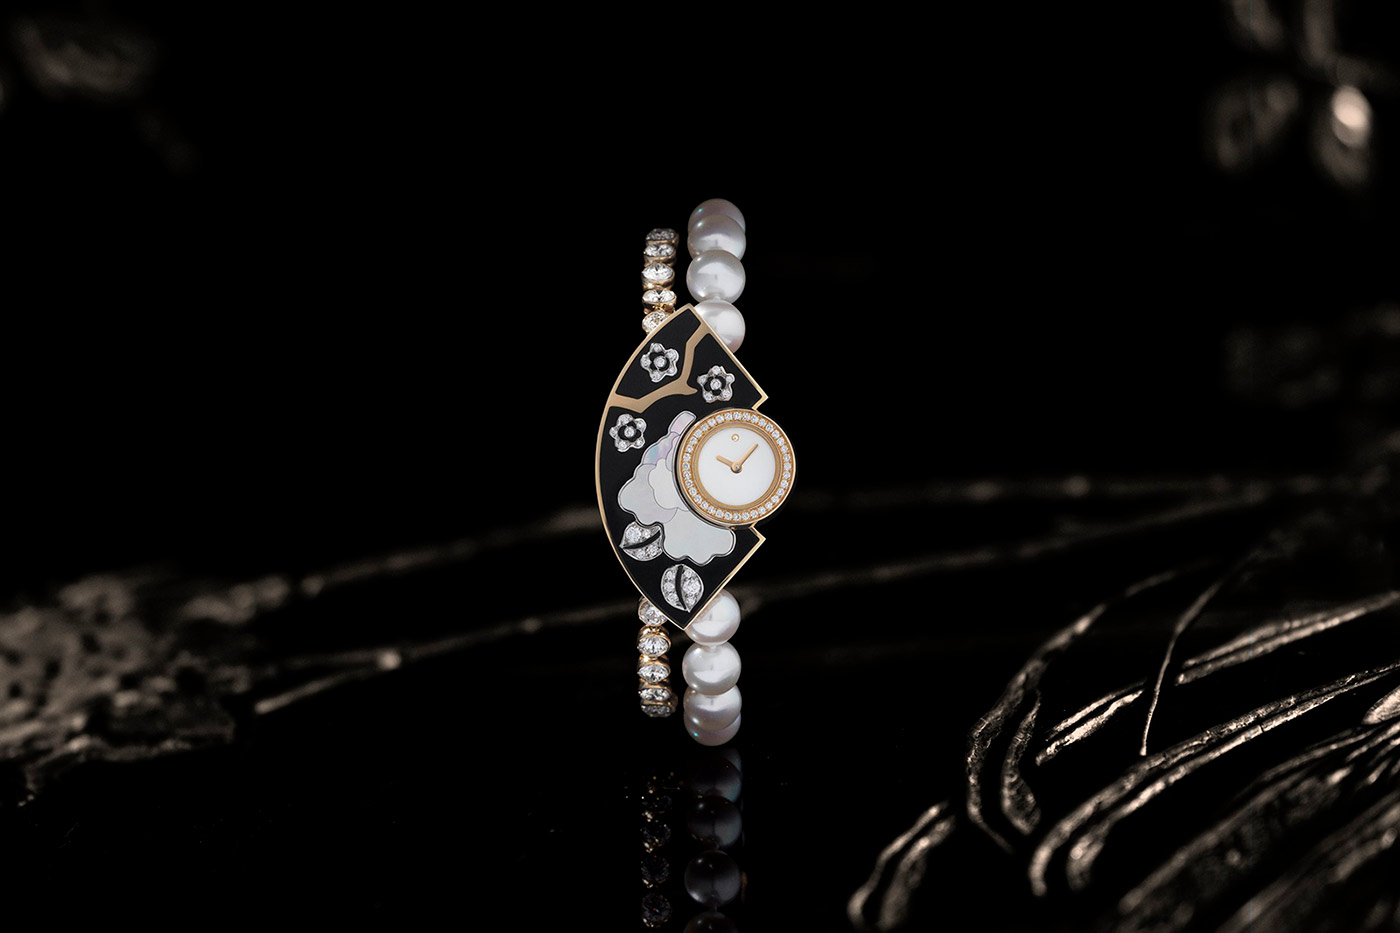 Chanel ‘Fleur De Laque’ watch from the ‘Coromandel’ collection in white gold, yellow gold, cultured pearls, diamonds, black lacquer and mother-of-pearl